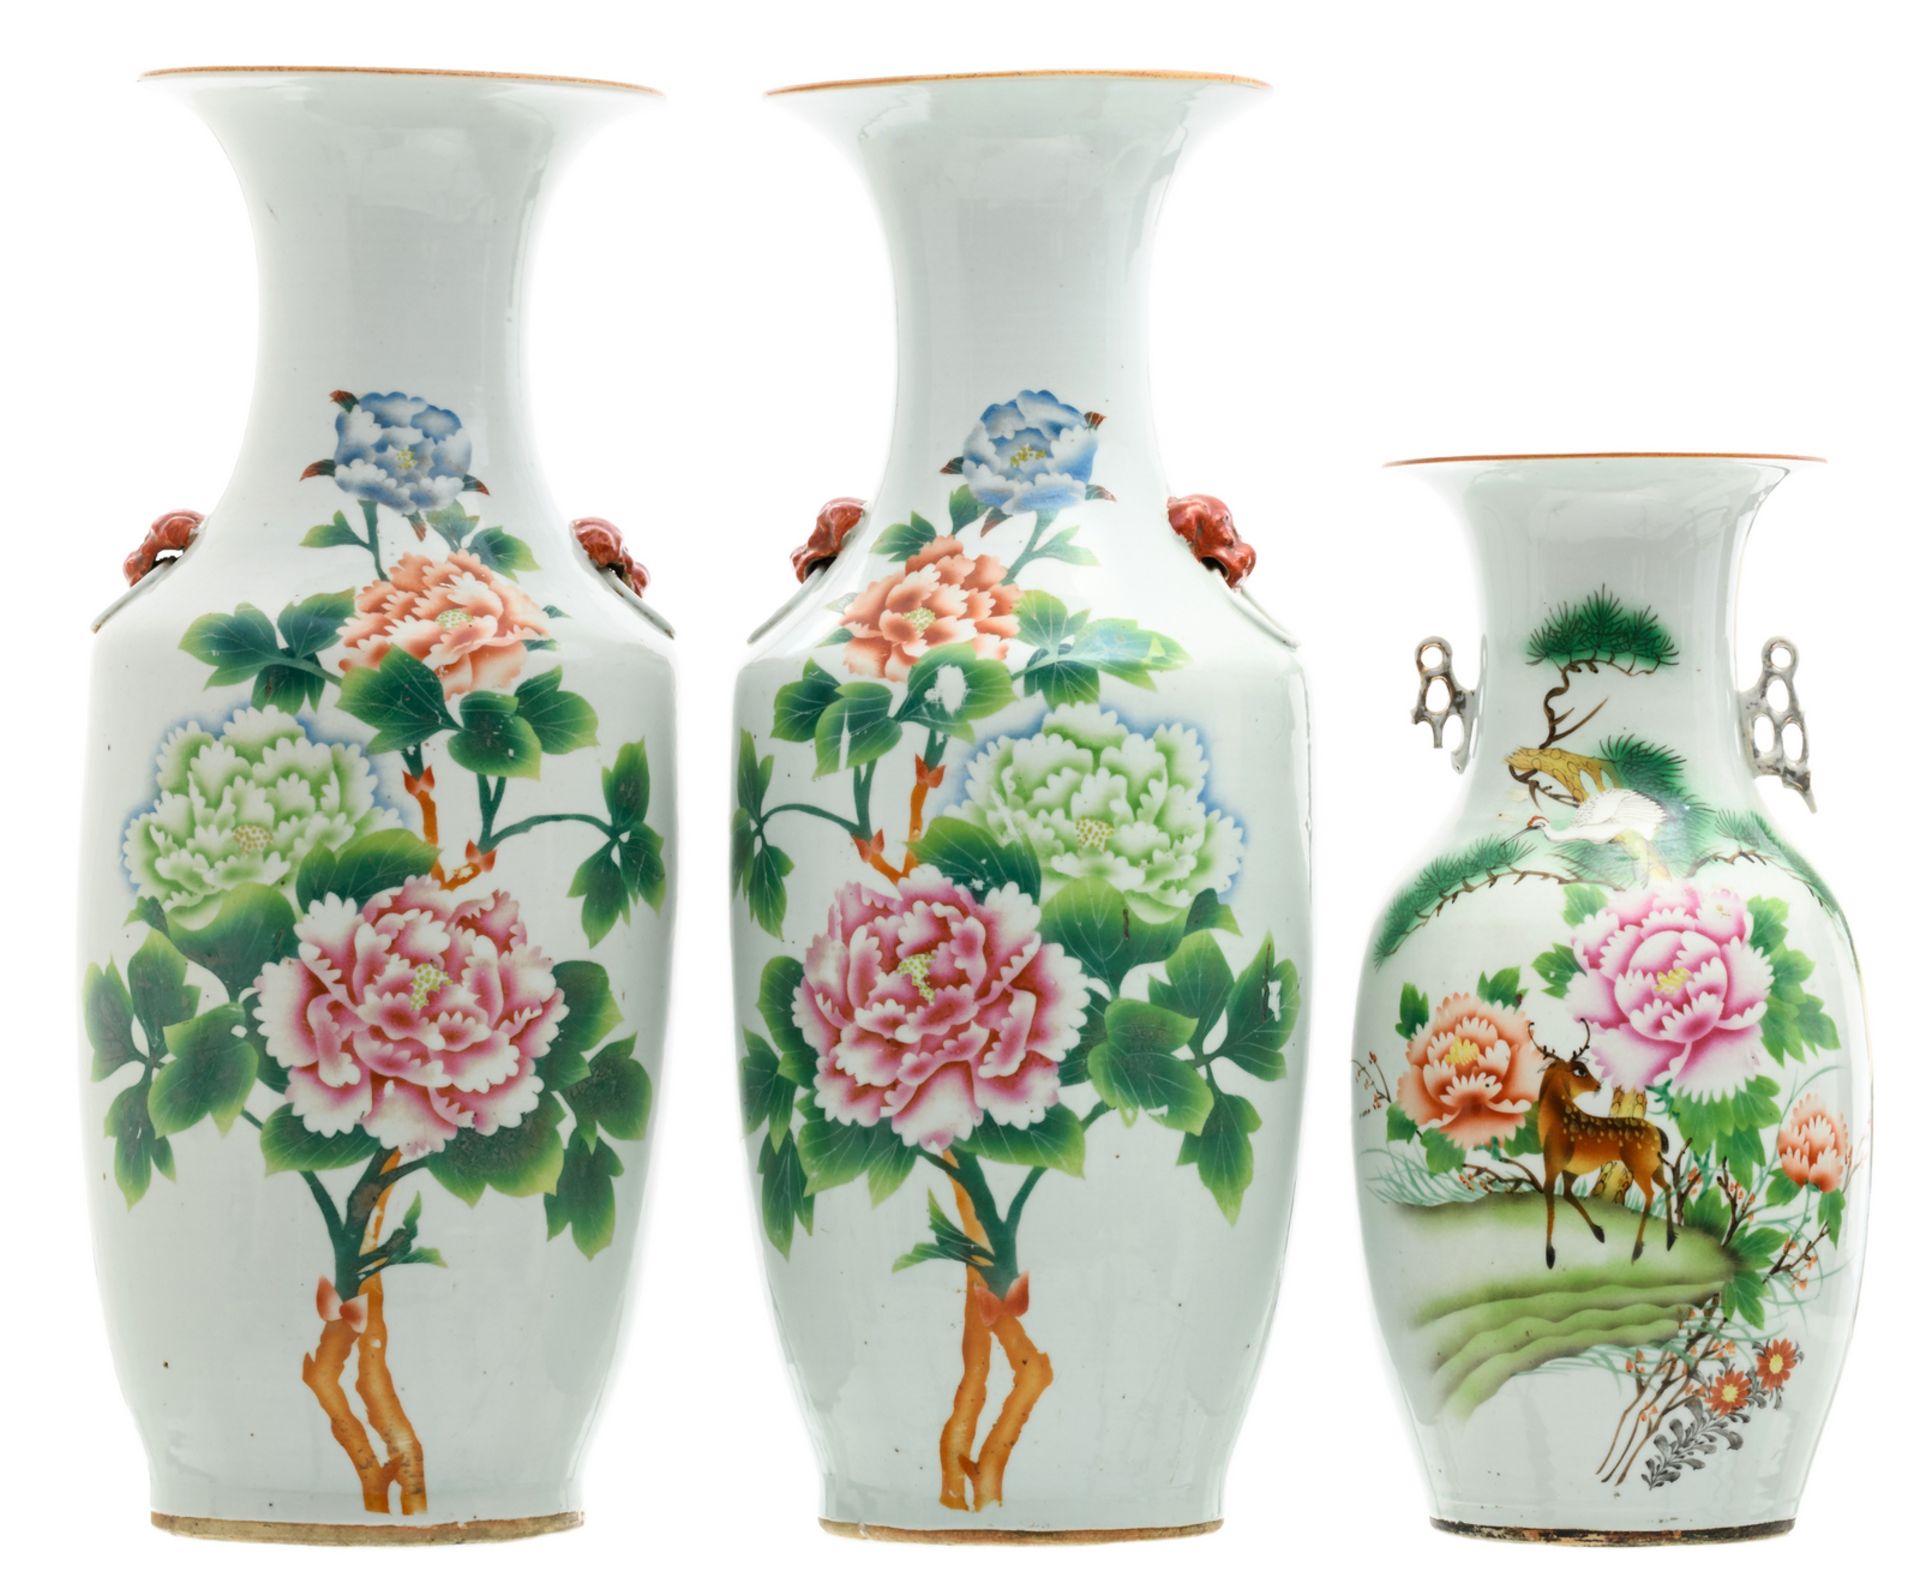 A pair of Chinese polychrome decorated vases with flower branches and calligraphic texts; added a